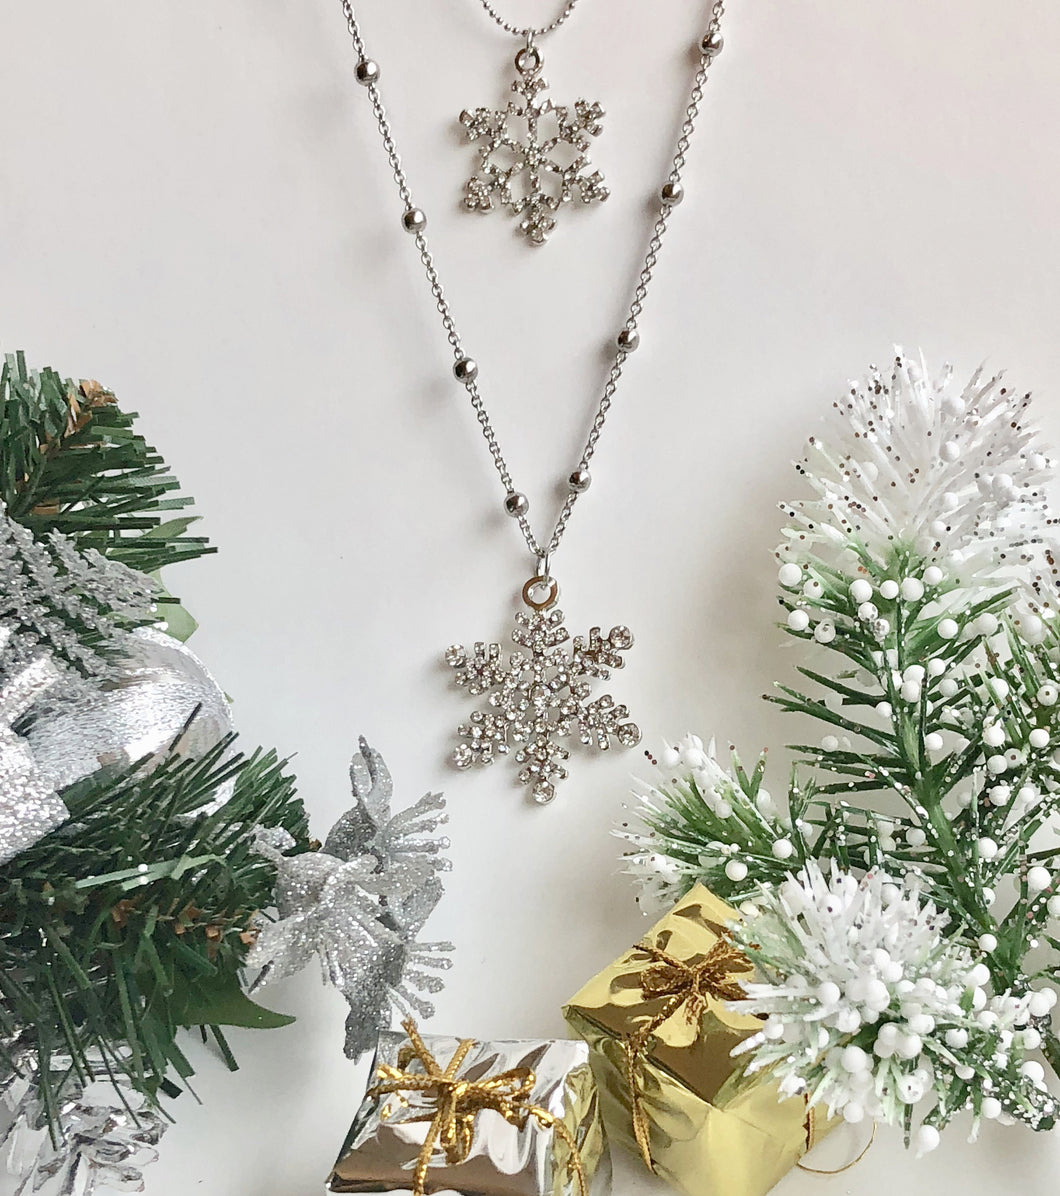 Double Snowflake Rhinestone Pendant and Chain Necklace Jewelry Gift in Silver